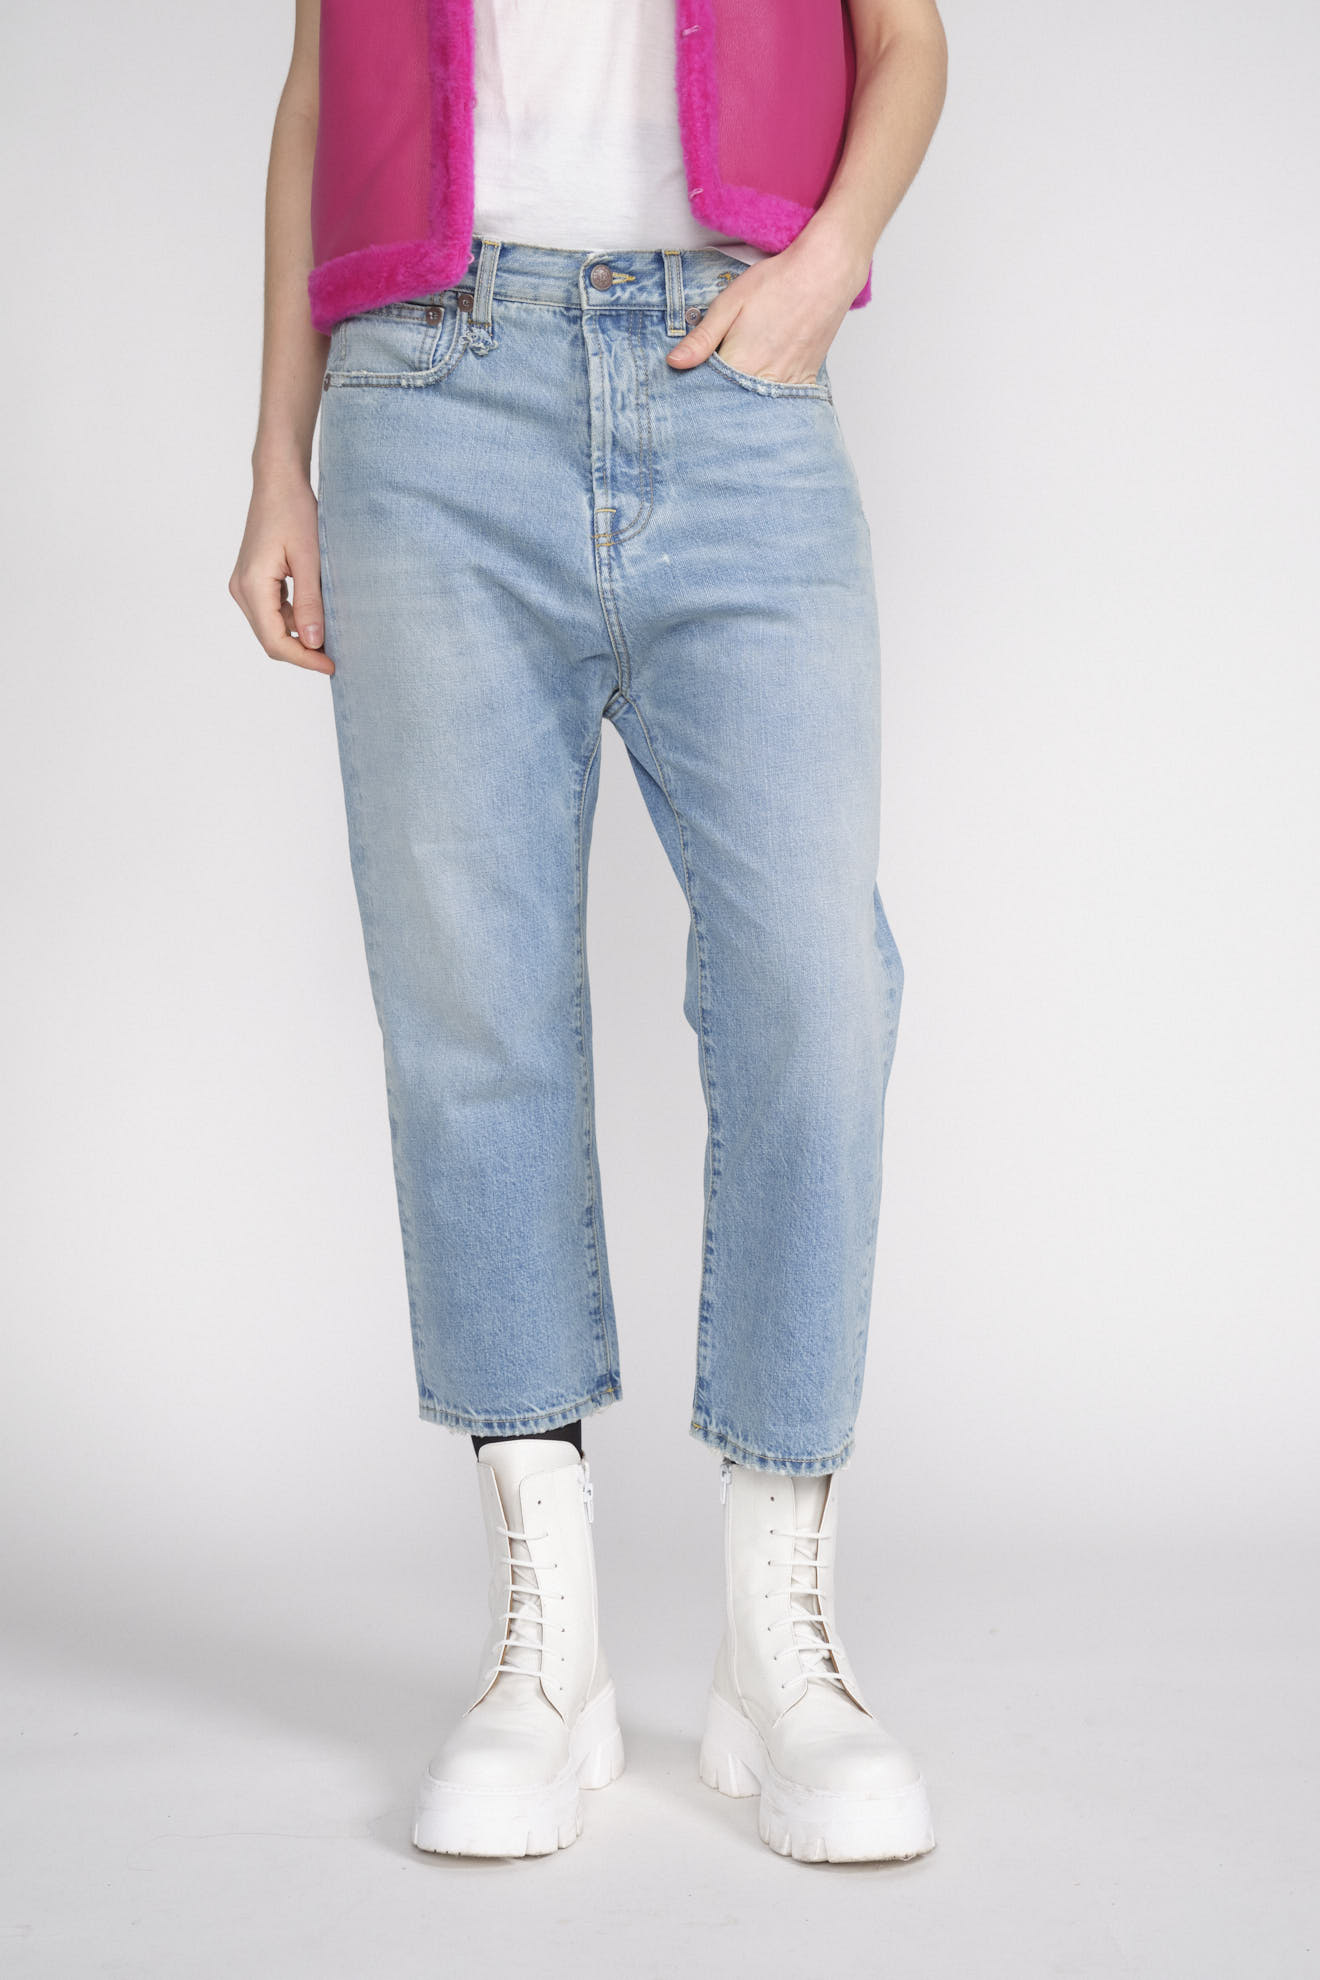 R13 Tailored Drop - Low crotch jeans blue 28